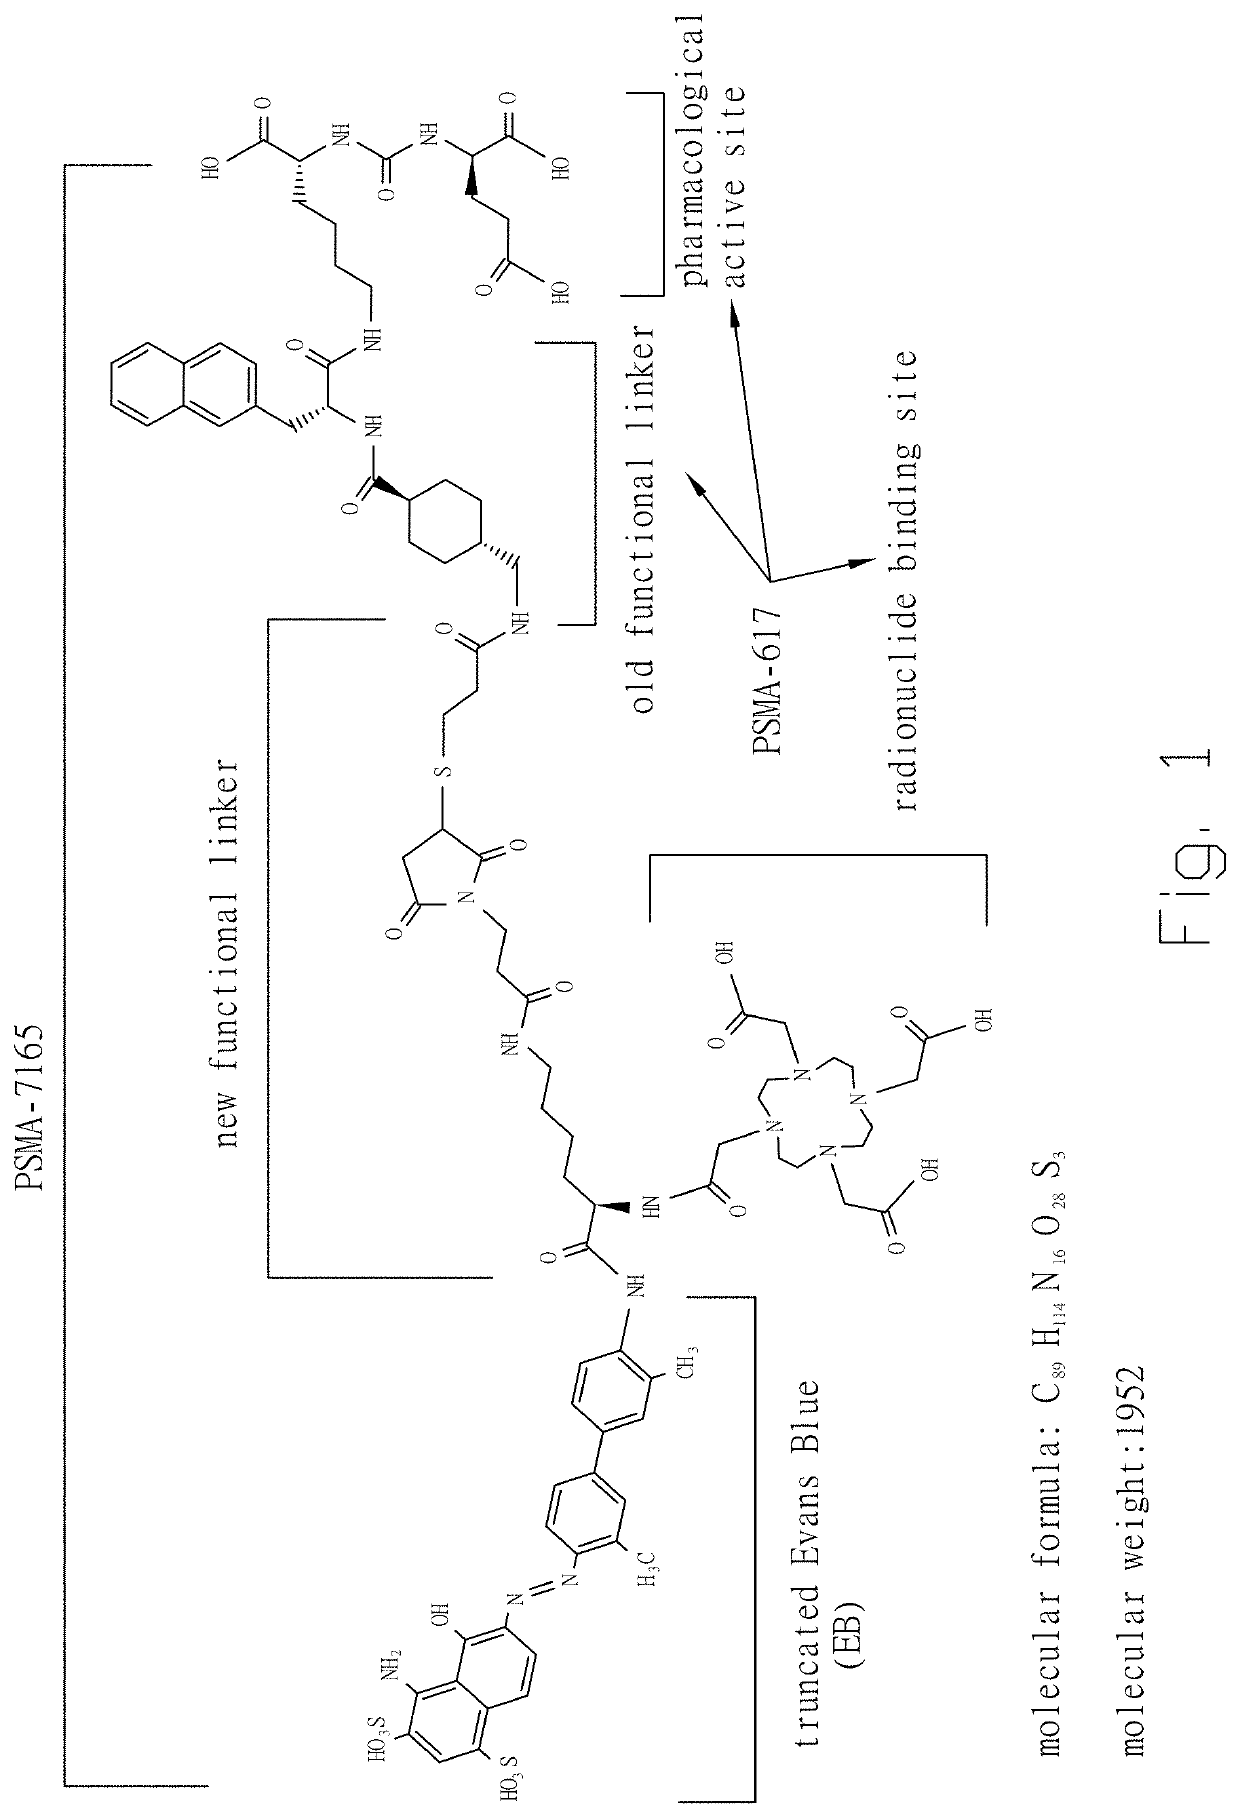 Structural molecule of peptide derivative for PSMA-targeting radiotherapy diagnosis and treatment